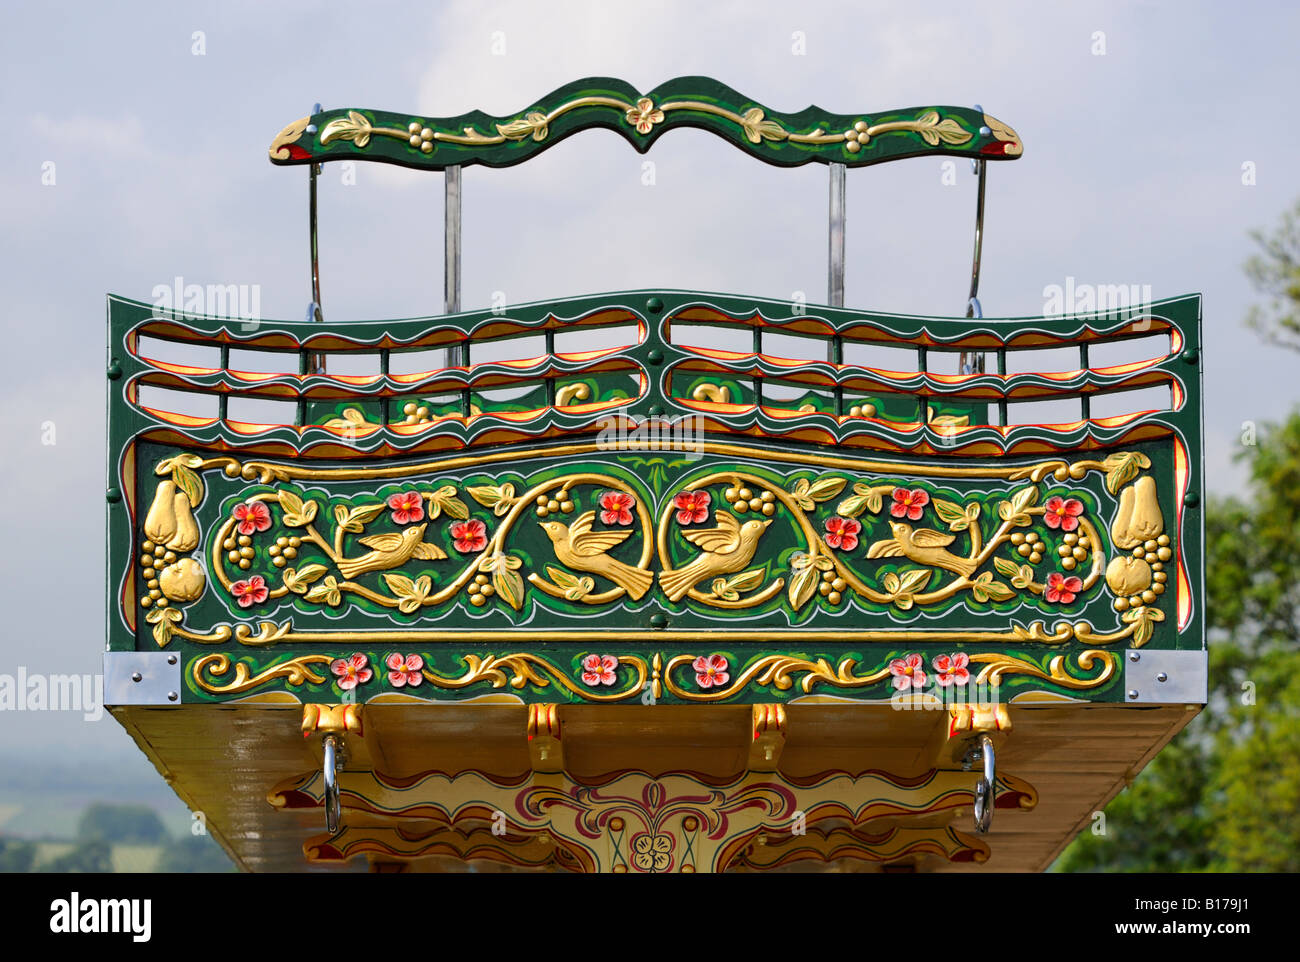 End view of painted, ornamented, cart. Appleby Horse Fair. Appleby-in-Westmorland, Cumbria, England, United Kingdom, Europe. Stock Photo